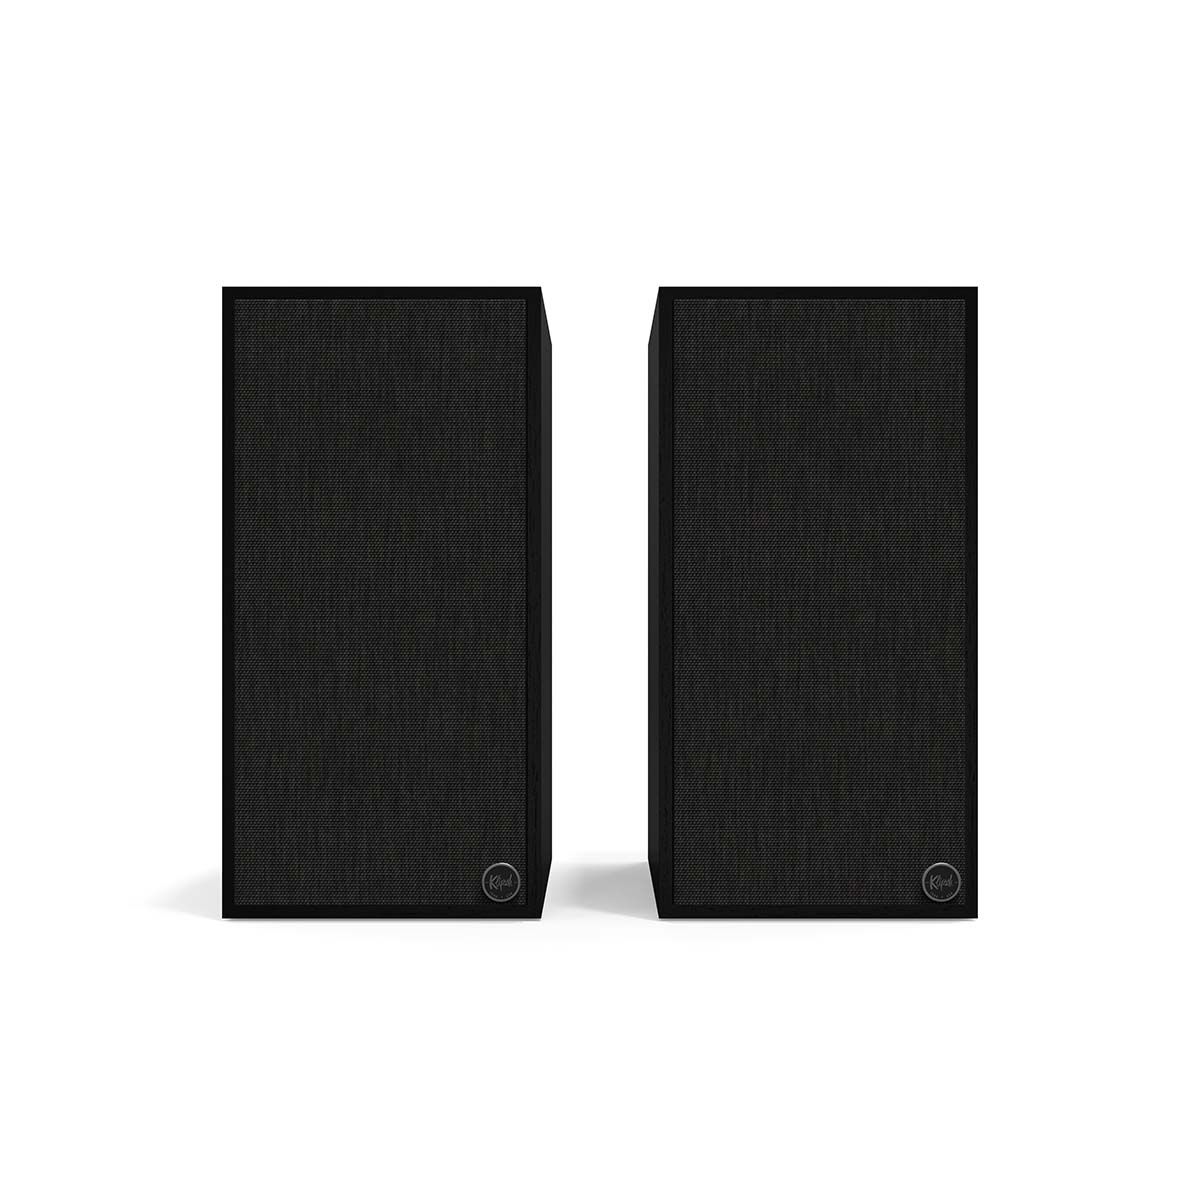 Klipsch The Sevens Powered Speakers - Pair - black front view with grille